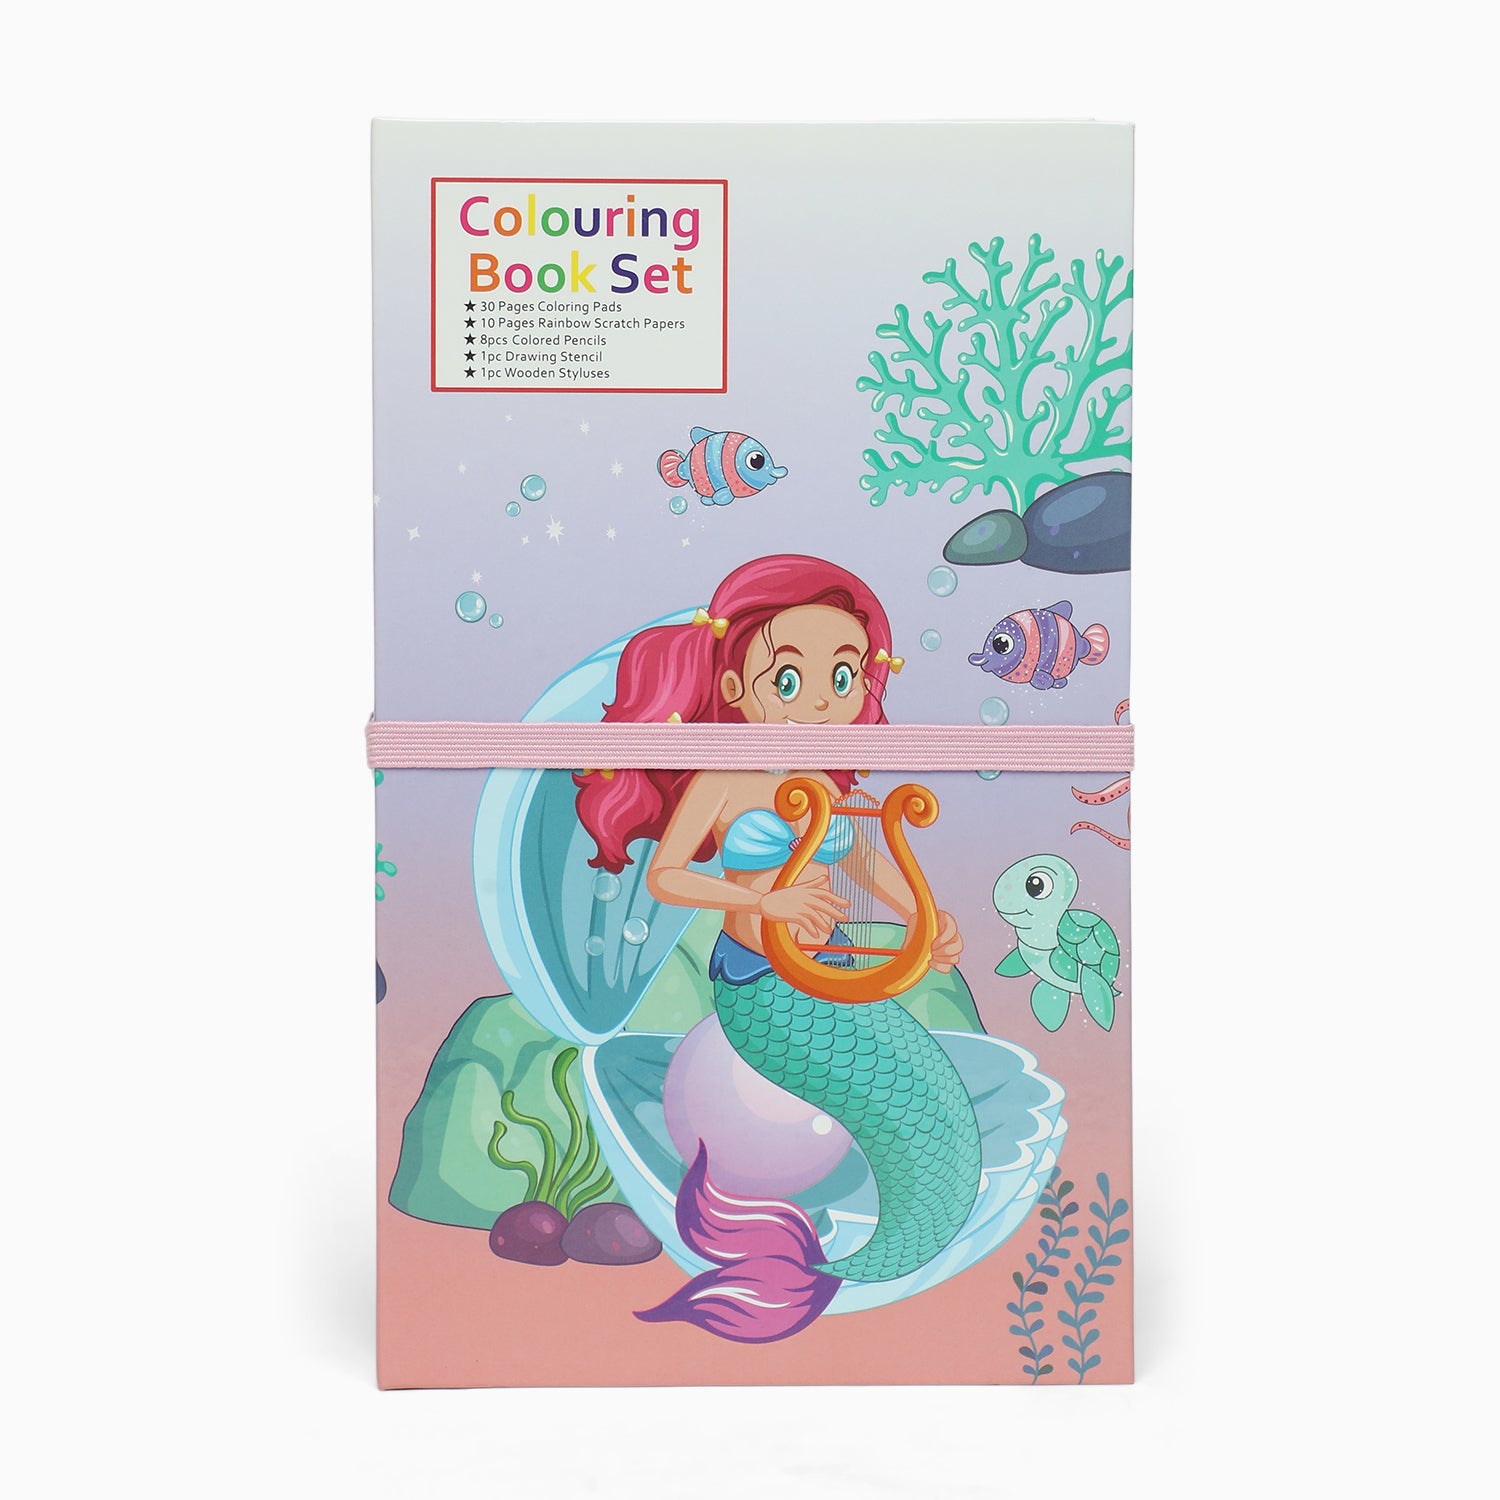 mermaid 3 fold colouring book with scratch notes, colouring pencil and stencil